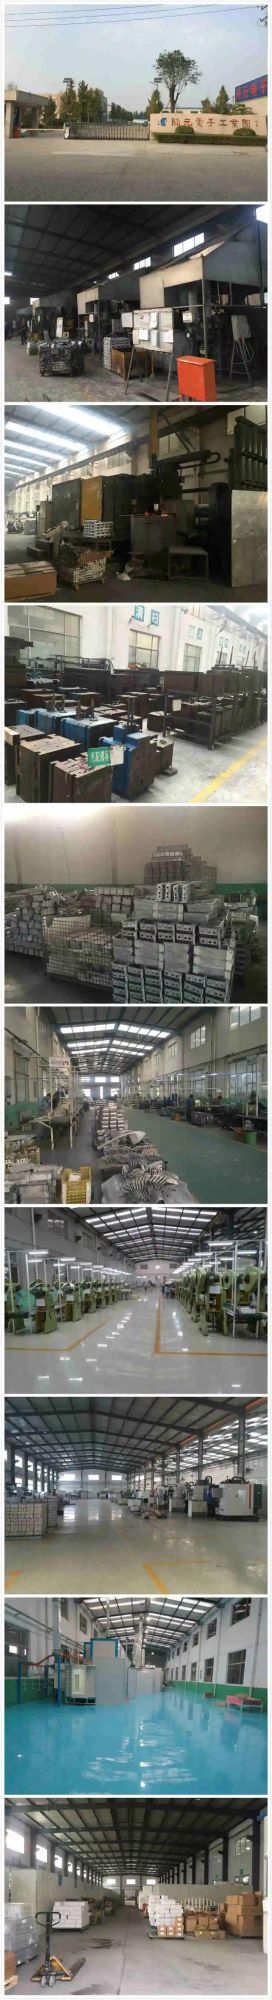 Die Casting Aluminum LED Street Light Housing Shell Auto Parts Factory